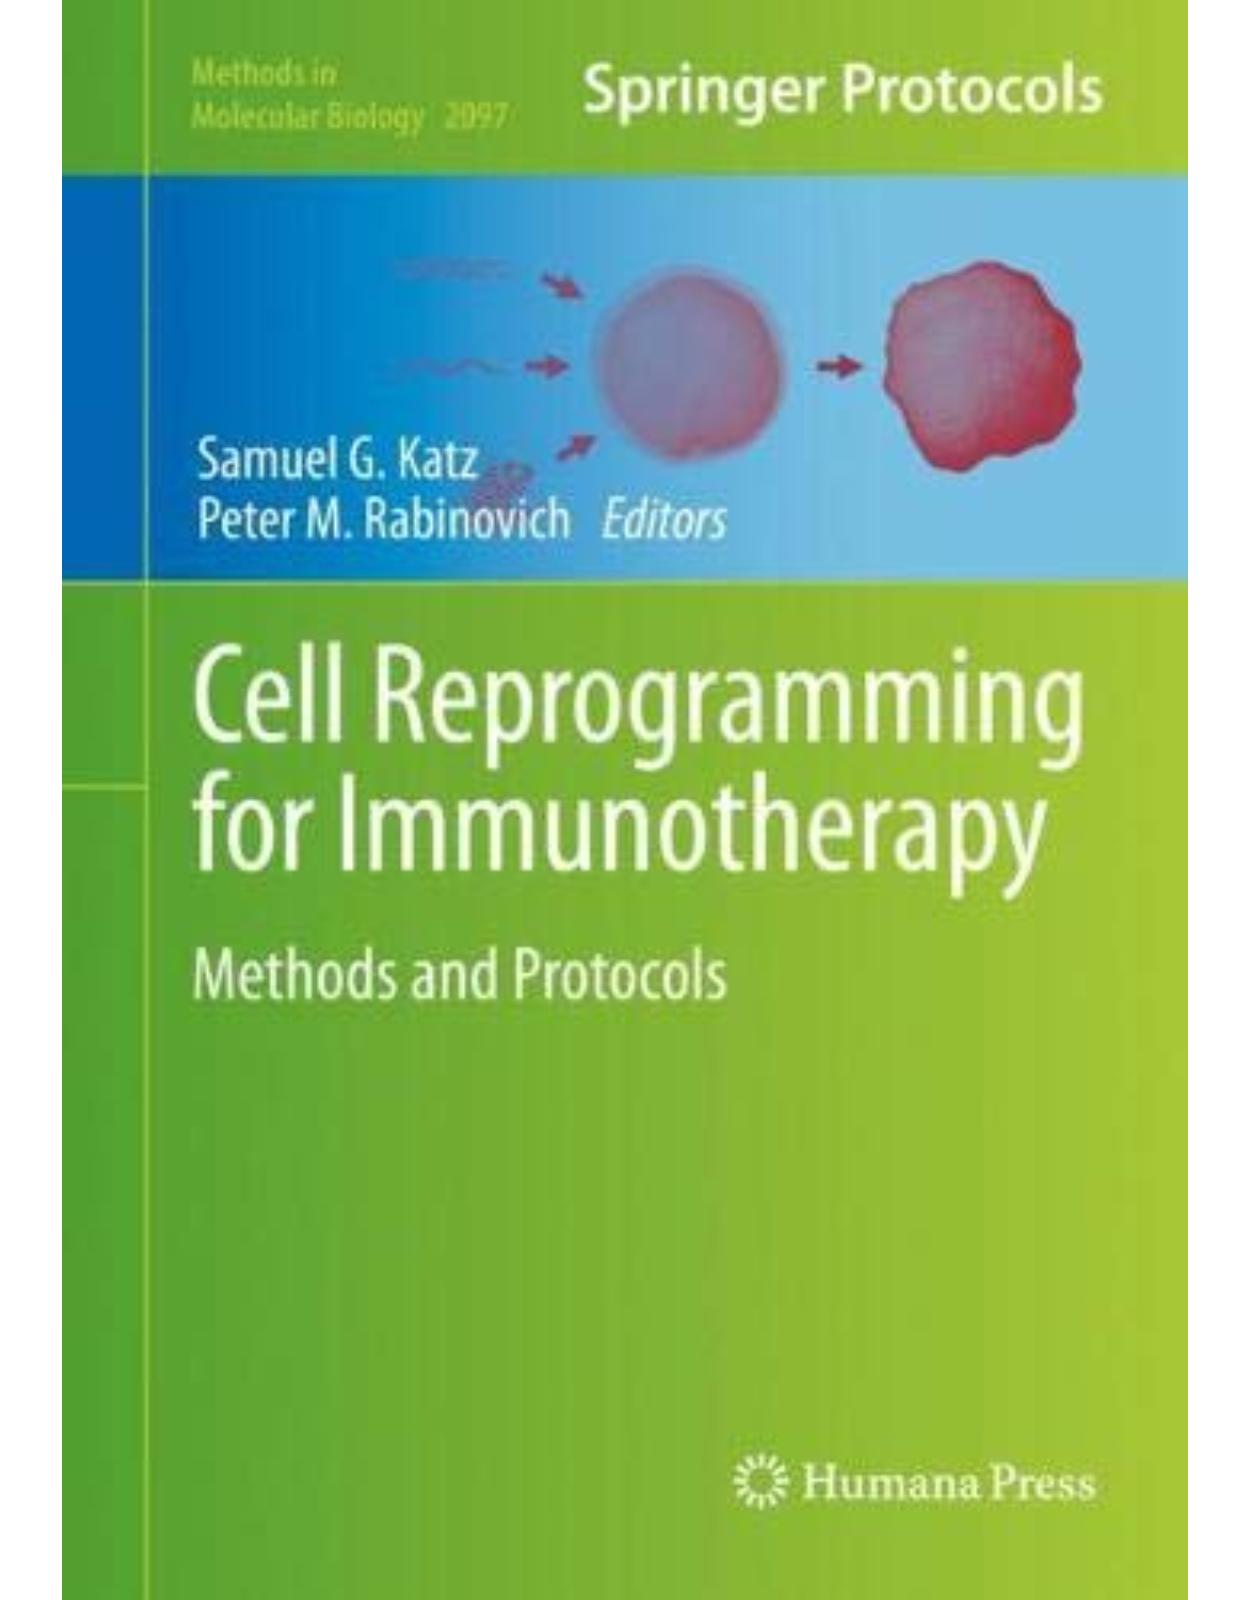 Cell Reprogramming for Immunotherapy: Methods and Protocols